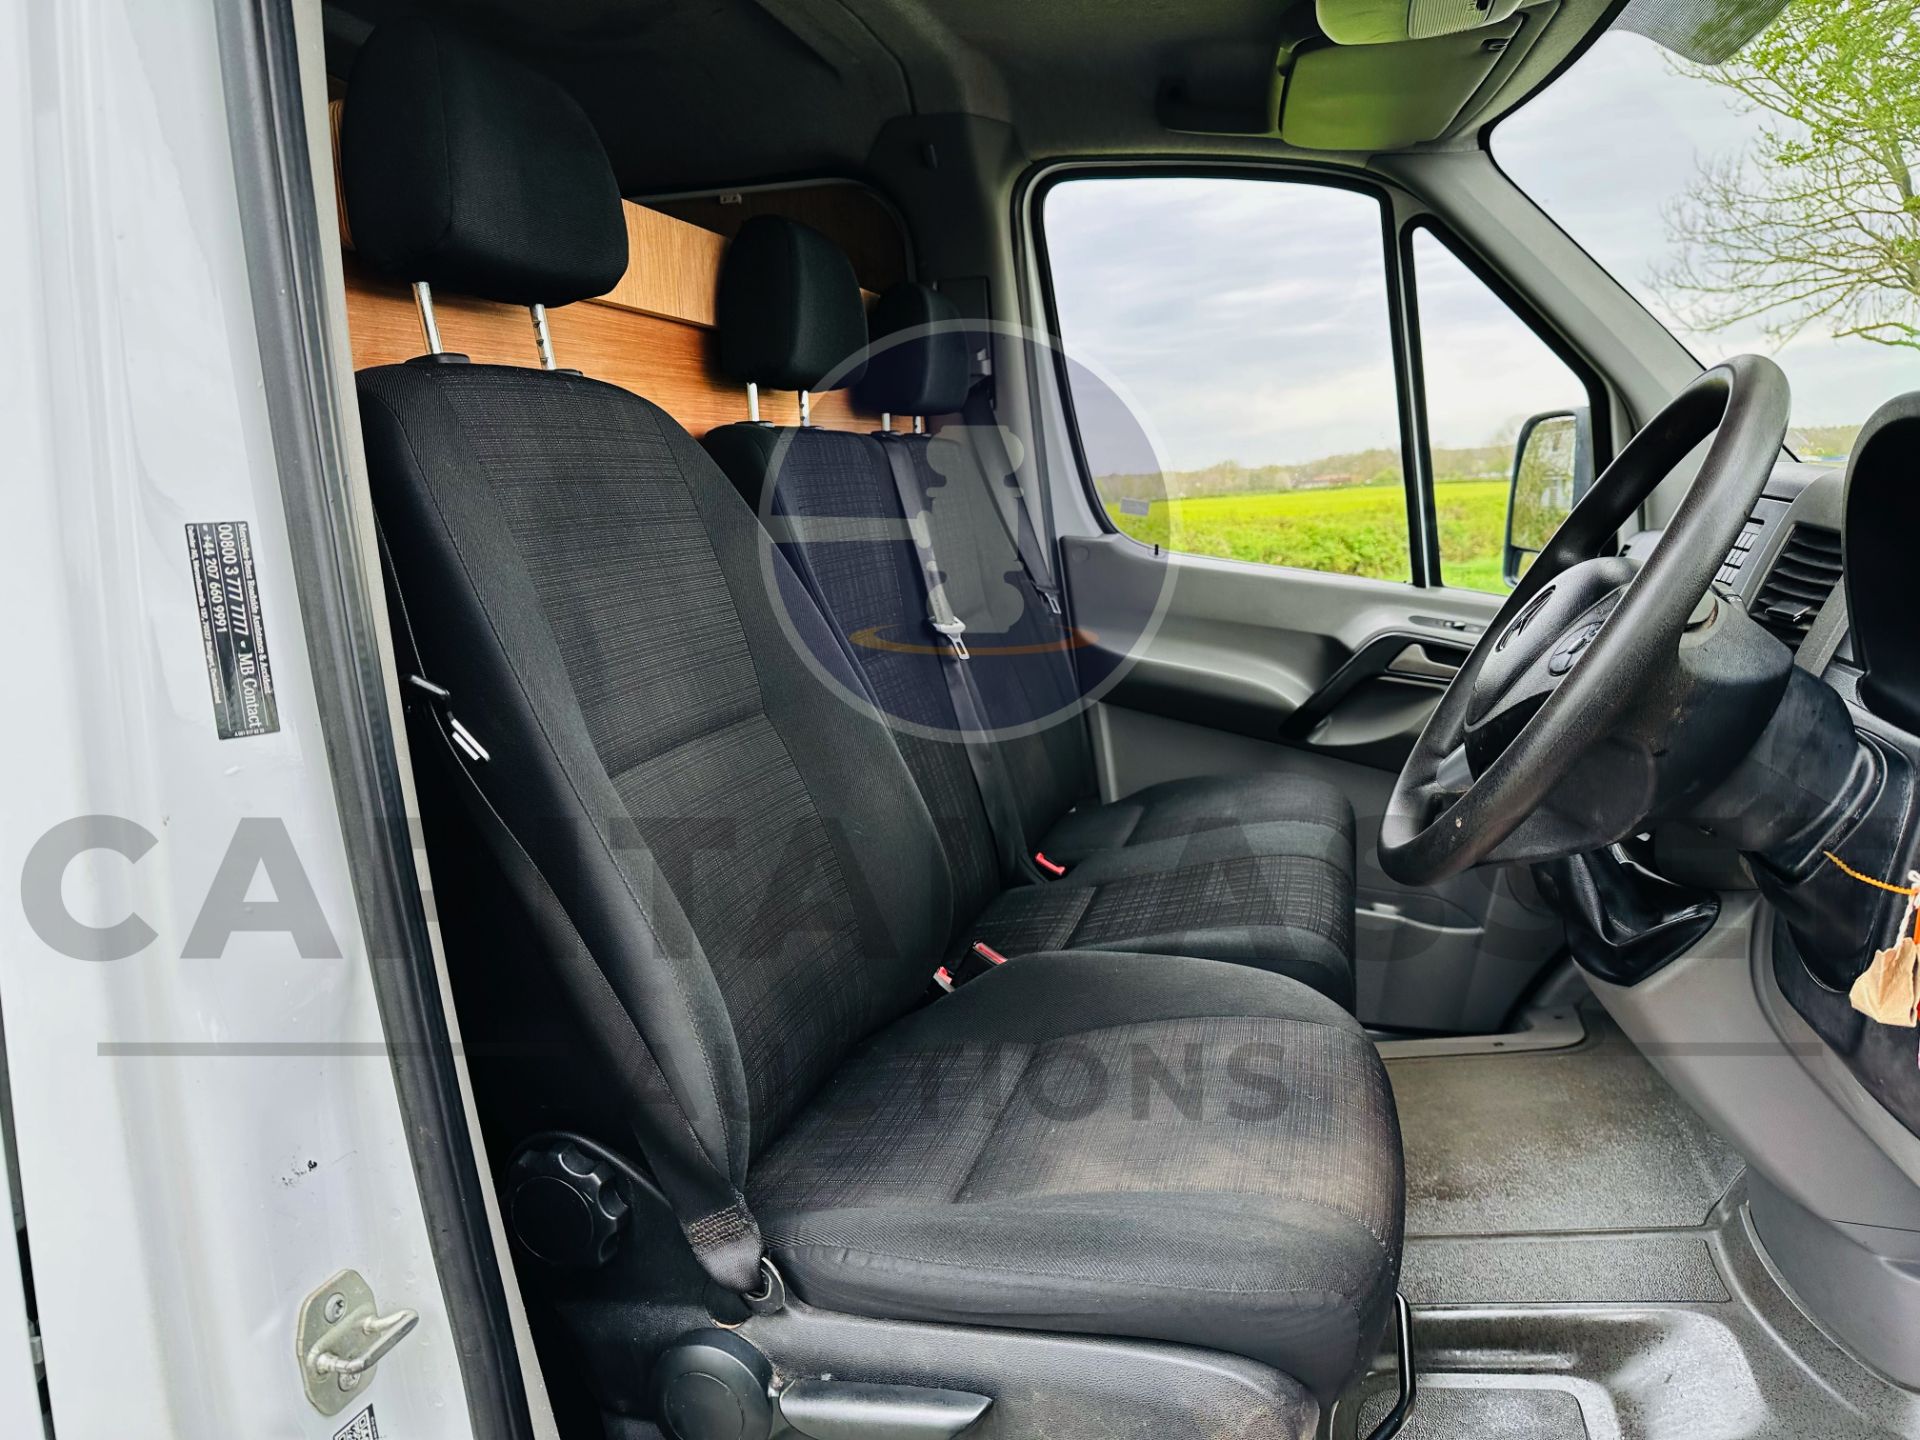 (ON SALE) MERCEDES SPRINTER 314 CDI *DOUBLE CAB TIPPER TRUCK* BLUETEC EDITION - 2019 MODEL 35K MILES - Image 20 of 31